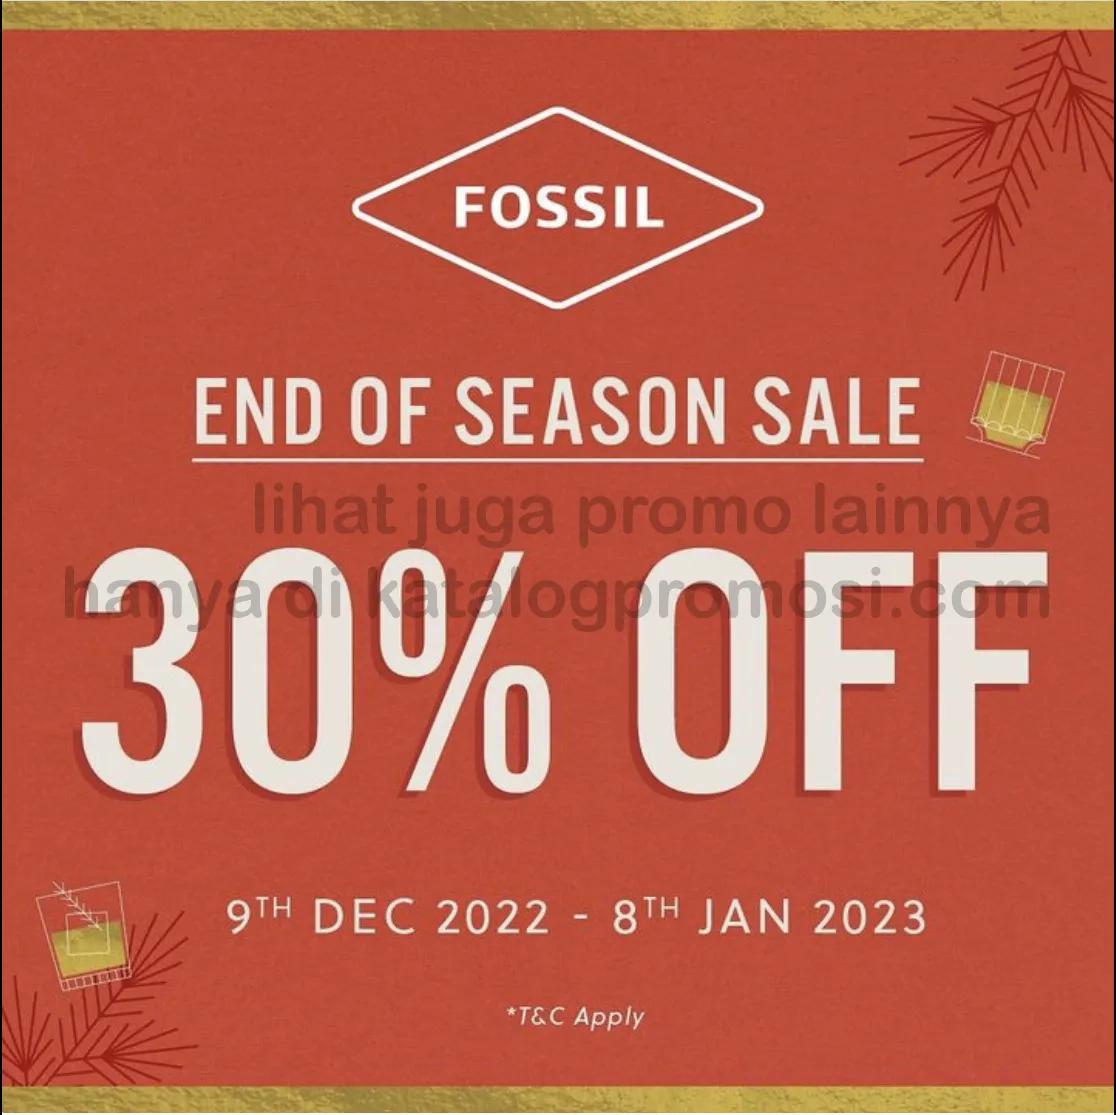 Promo FOSSIL End of Season Sale! Discount 30% off